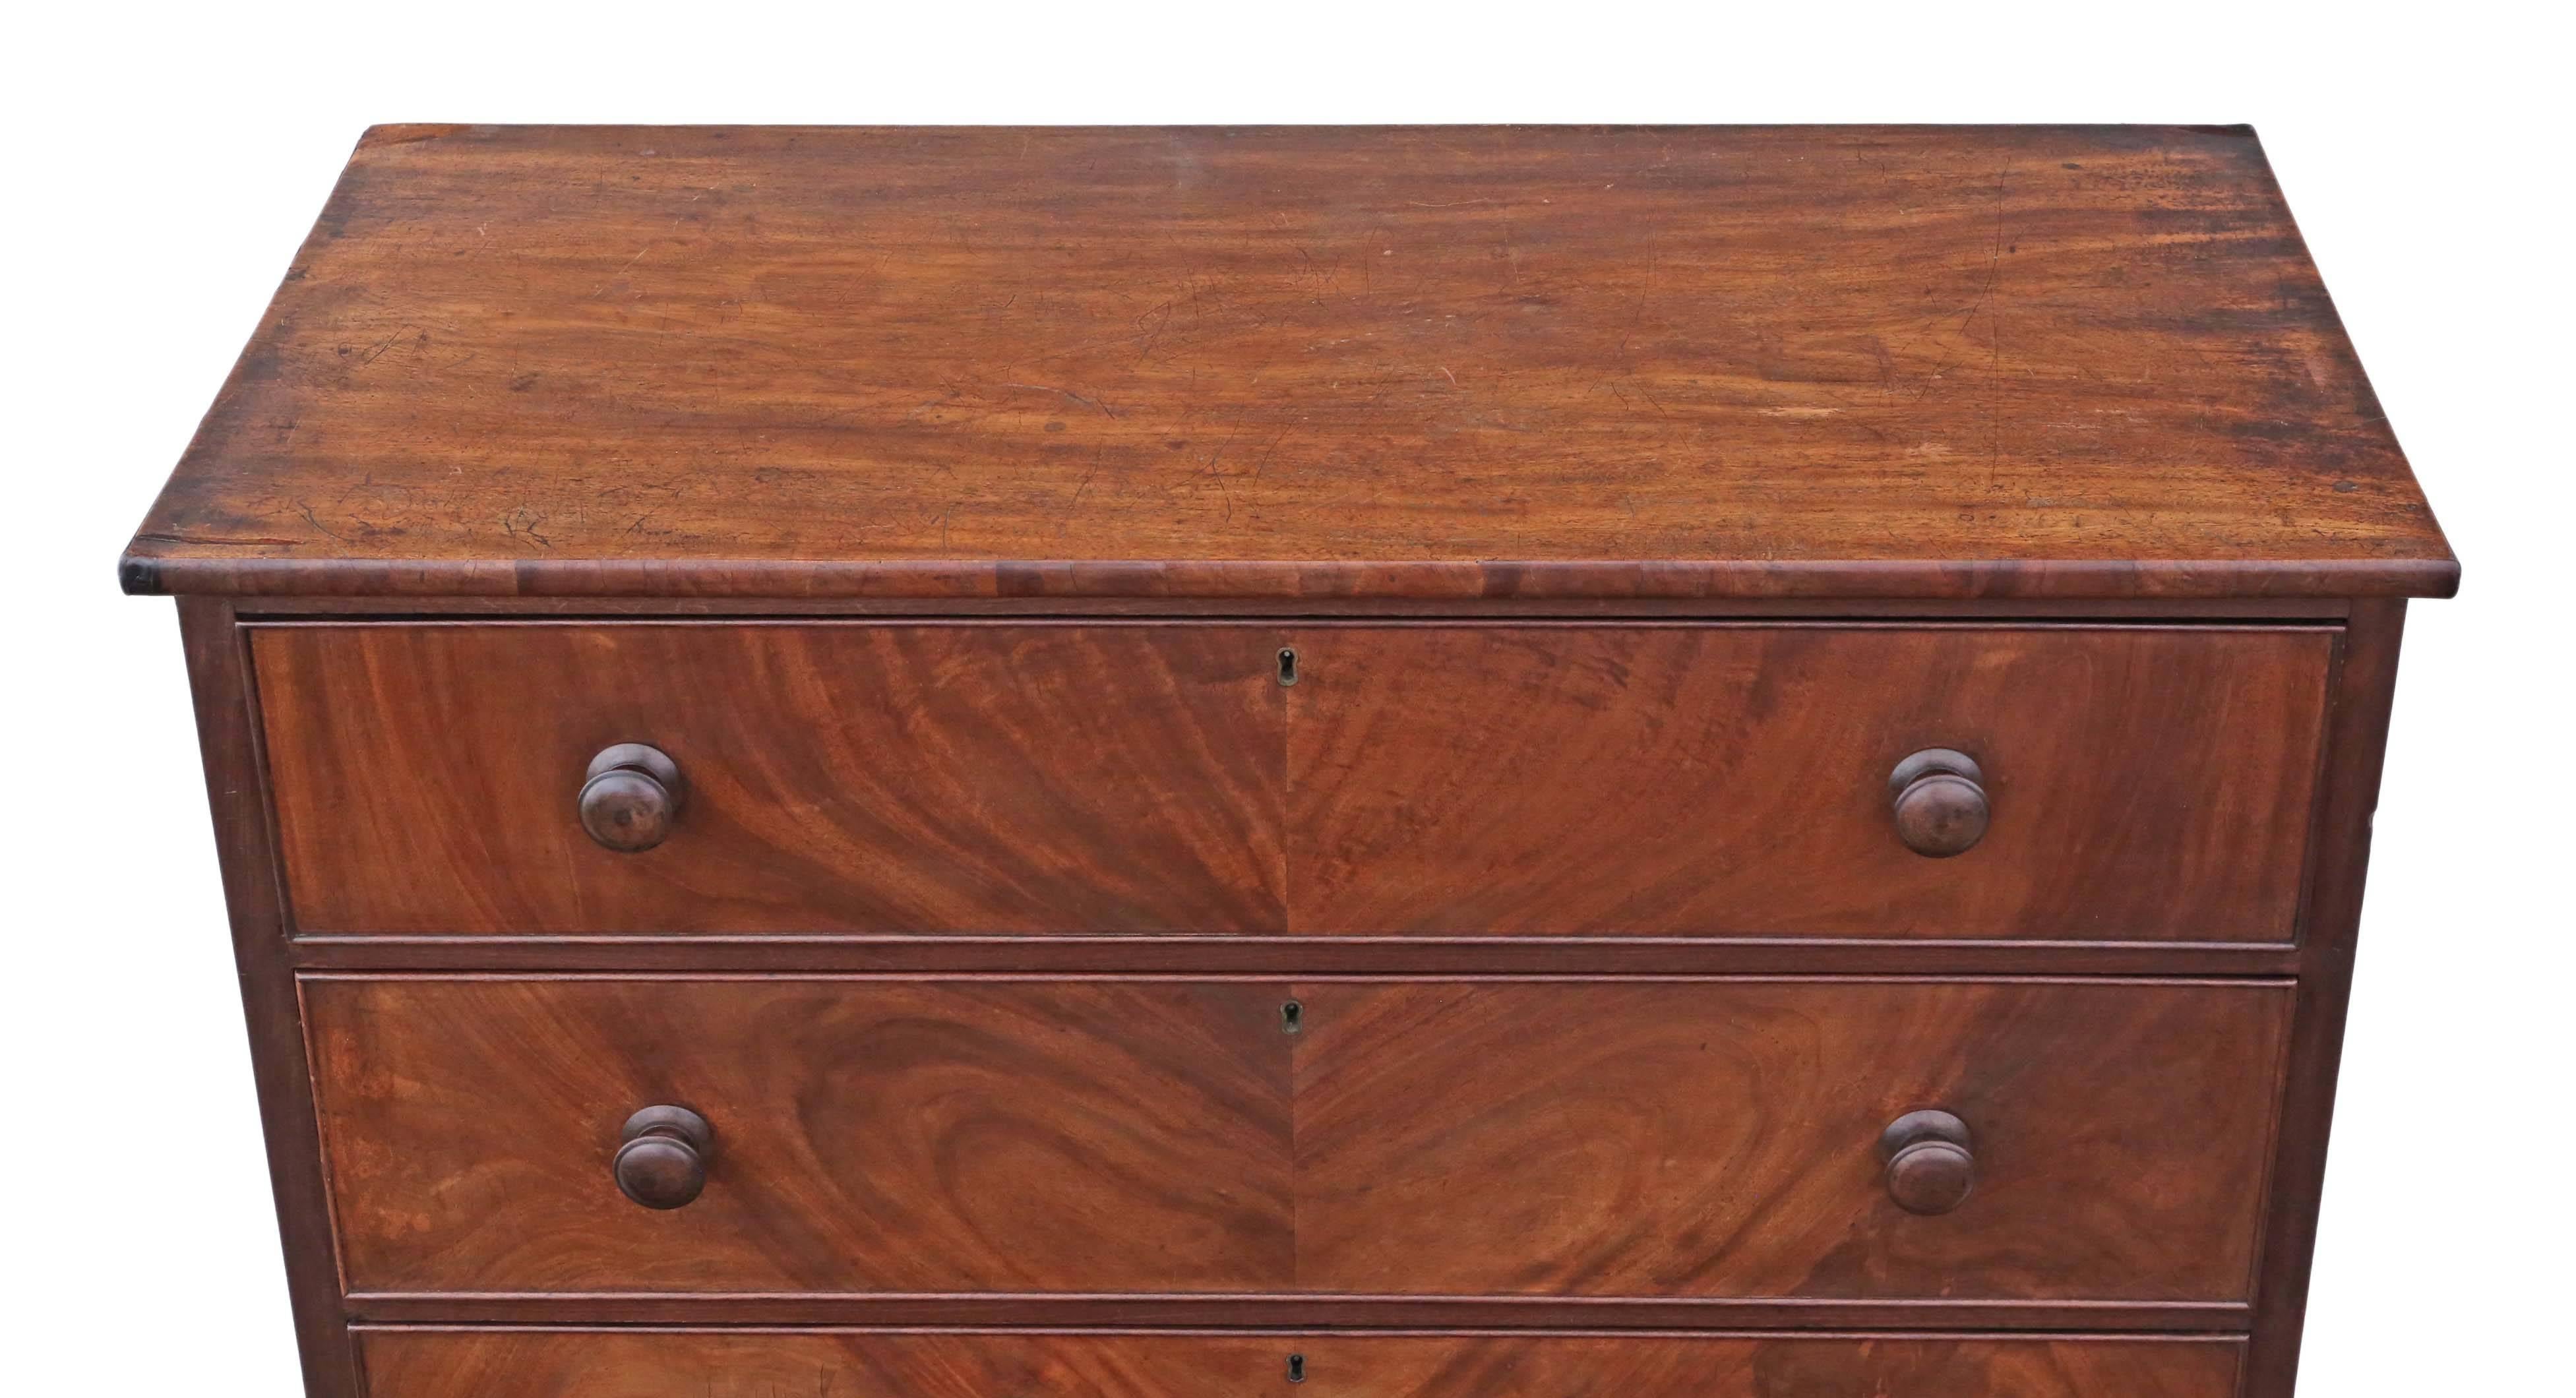 Antique large quality Regency / William IV mahogany tallboy chest of drawers, circa 1820-1840. Huge graduated drawers.

Solid and strong, with no loose joints and no woodworm. Full of age, character and charm. A good rare piece of antique